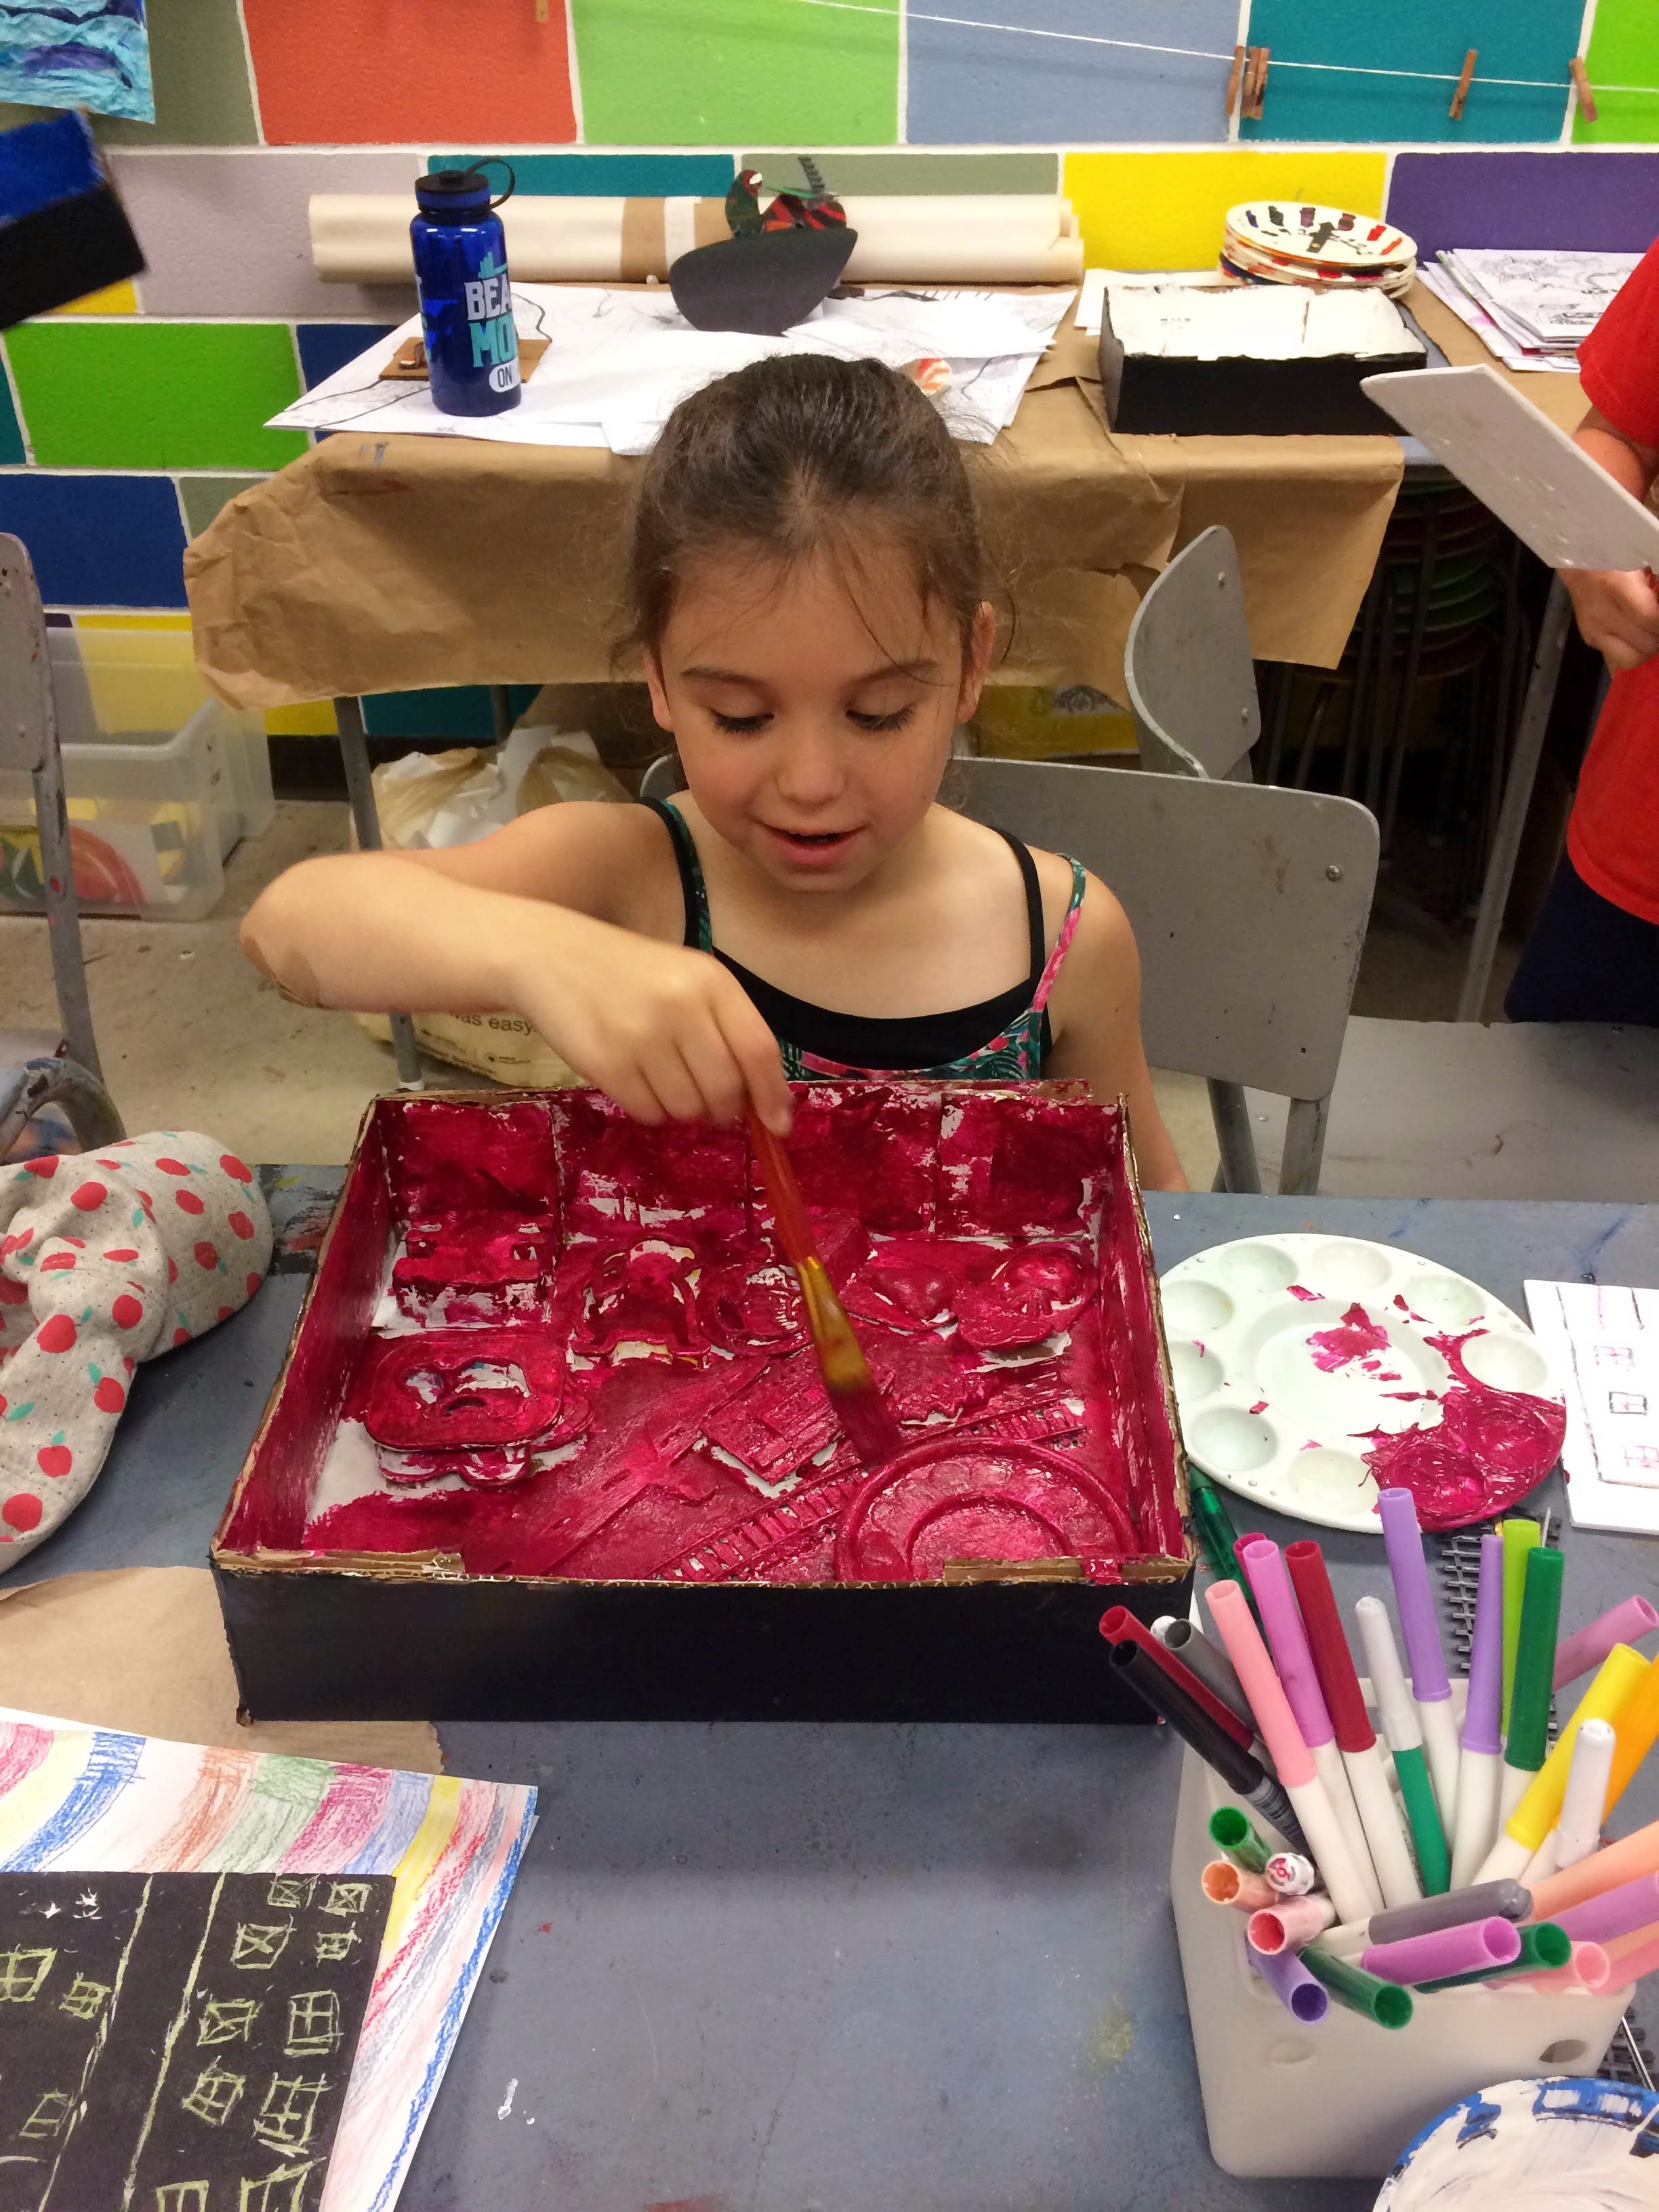 A young girl paints the inside of a box filled with various found objects a bright magenta